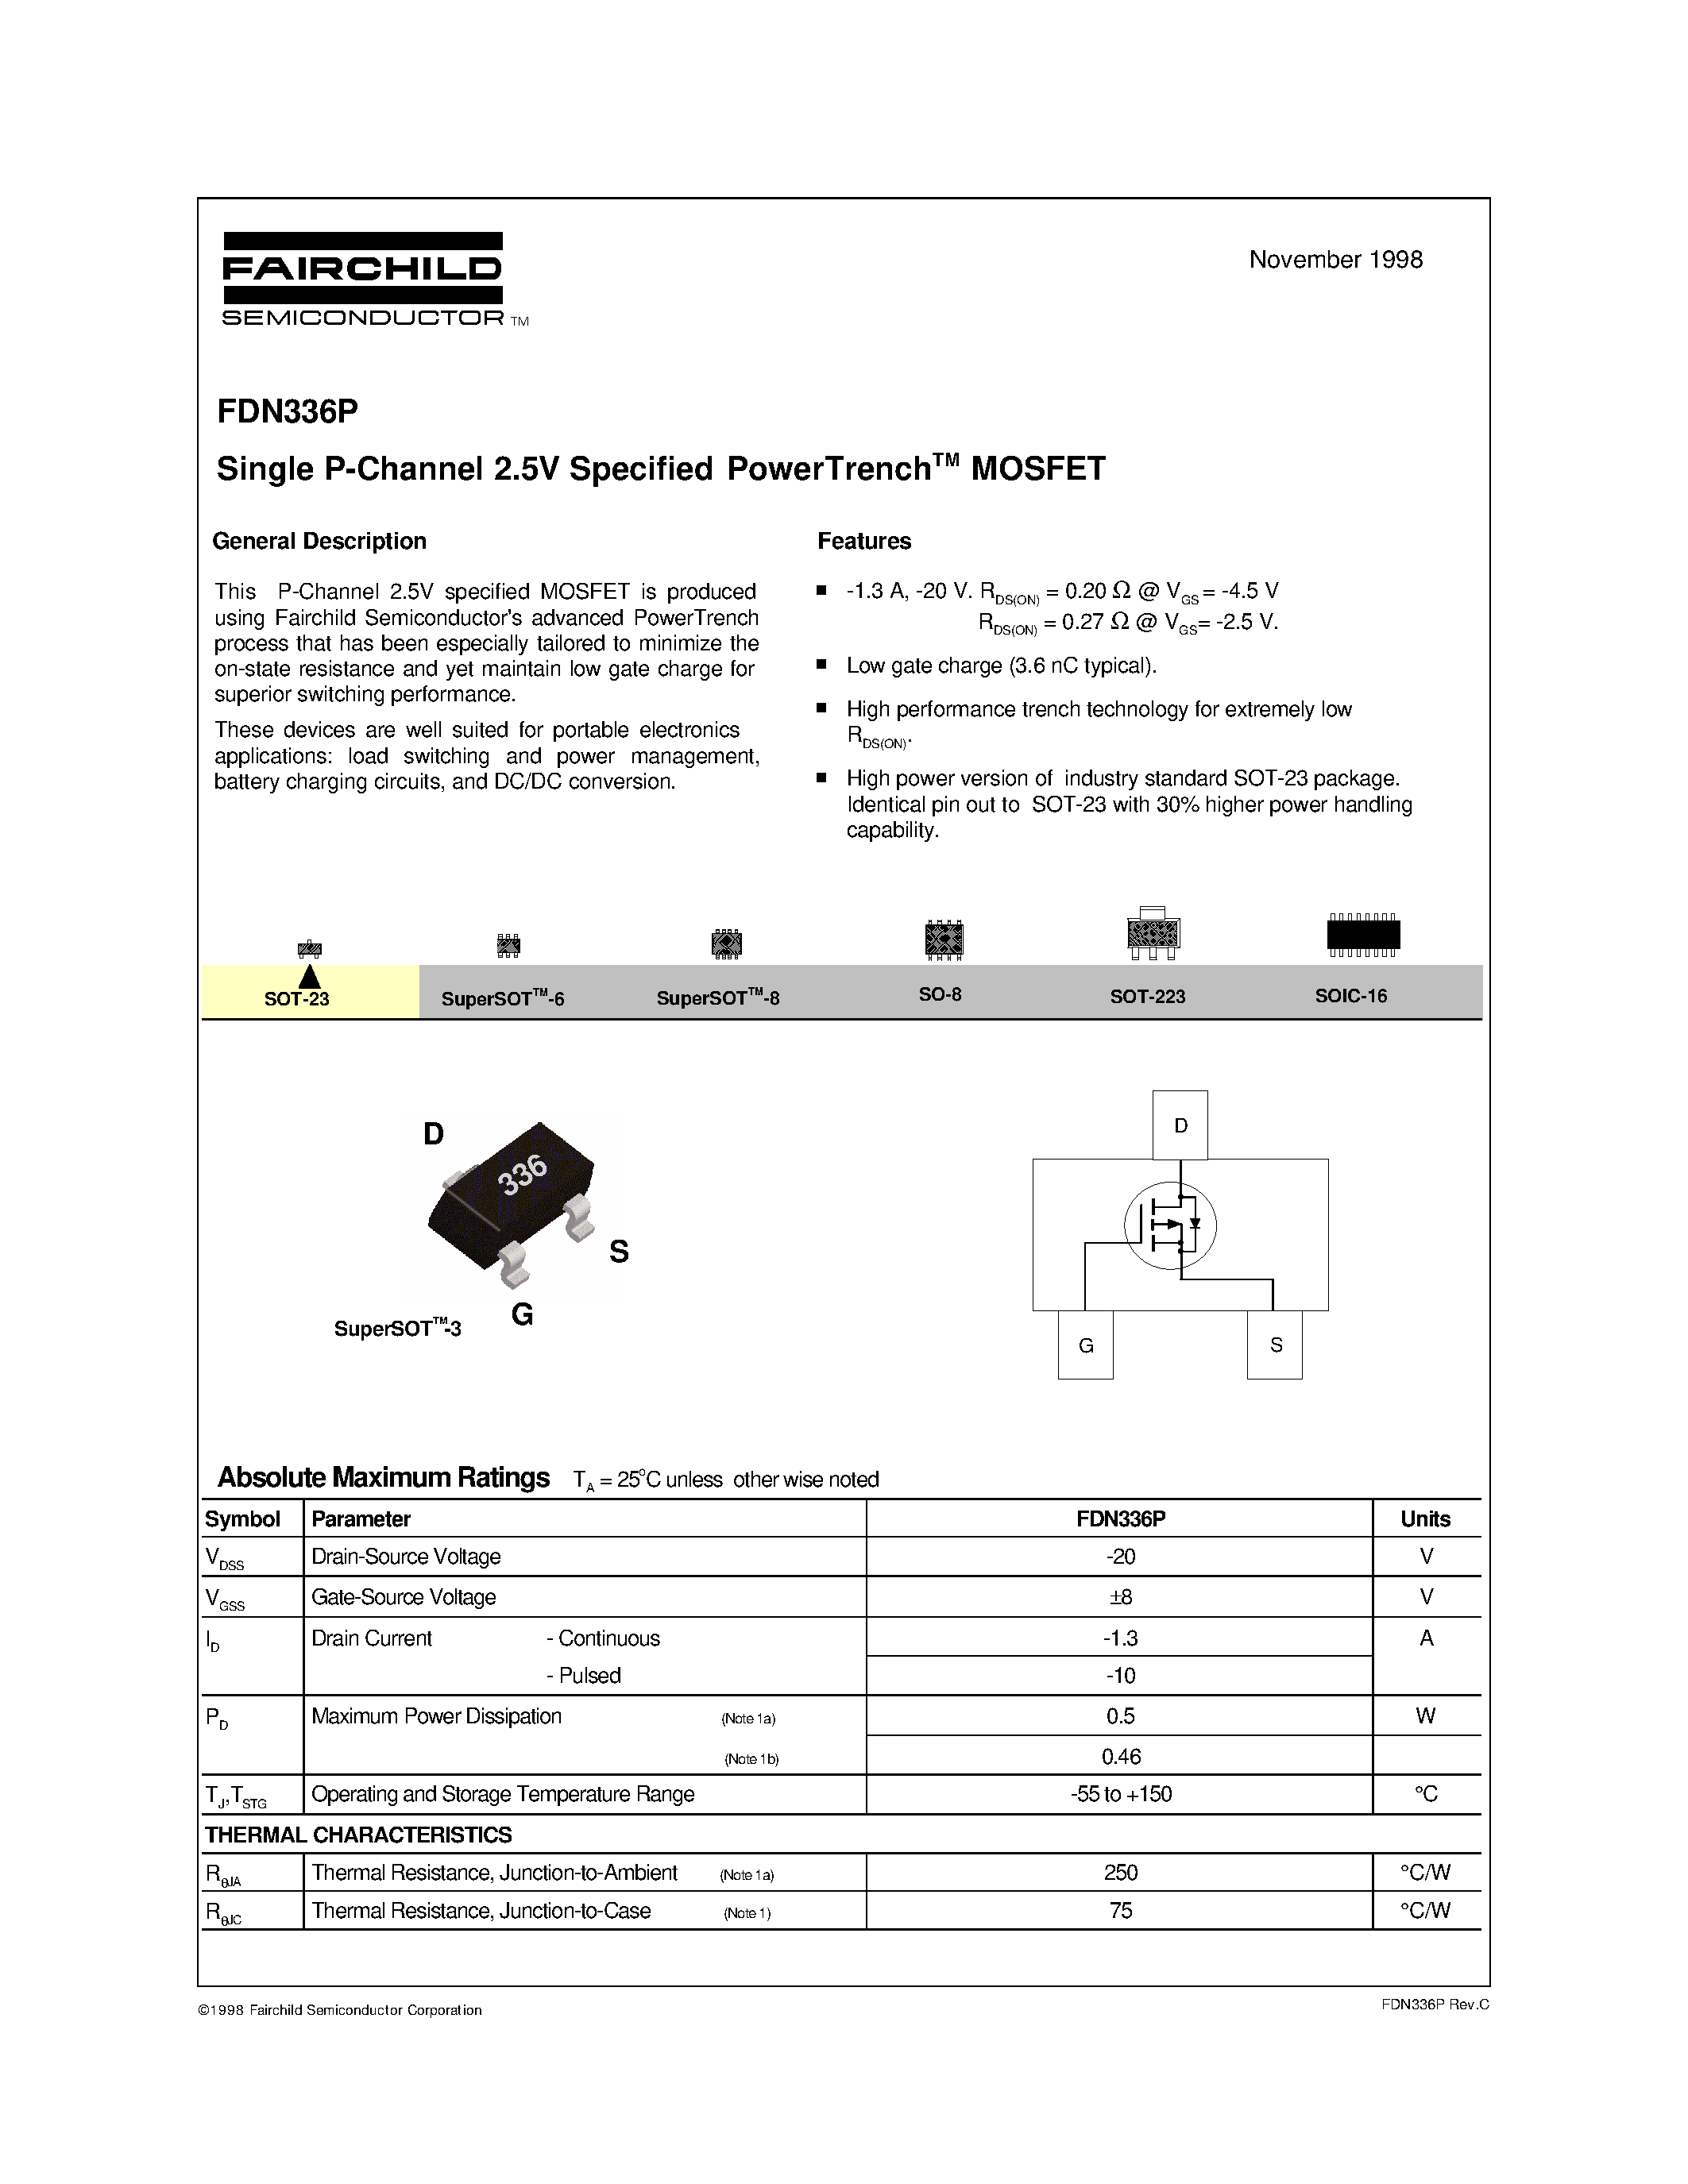 Даташит FDN336P-Single P-Channel 2.5V Specified PowerTrenchTM MOSFET страница 1